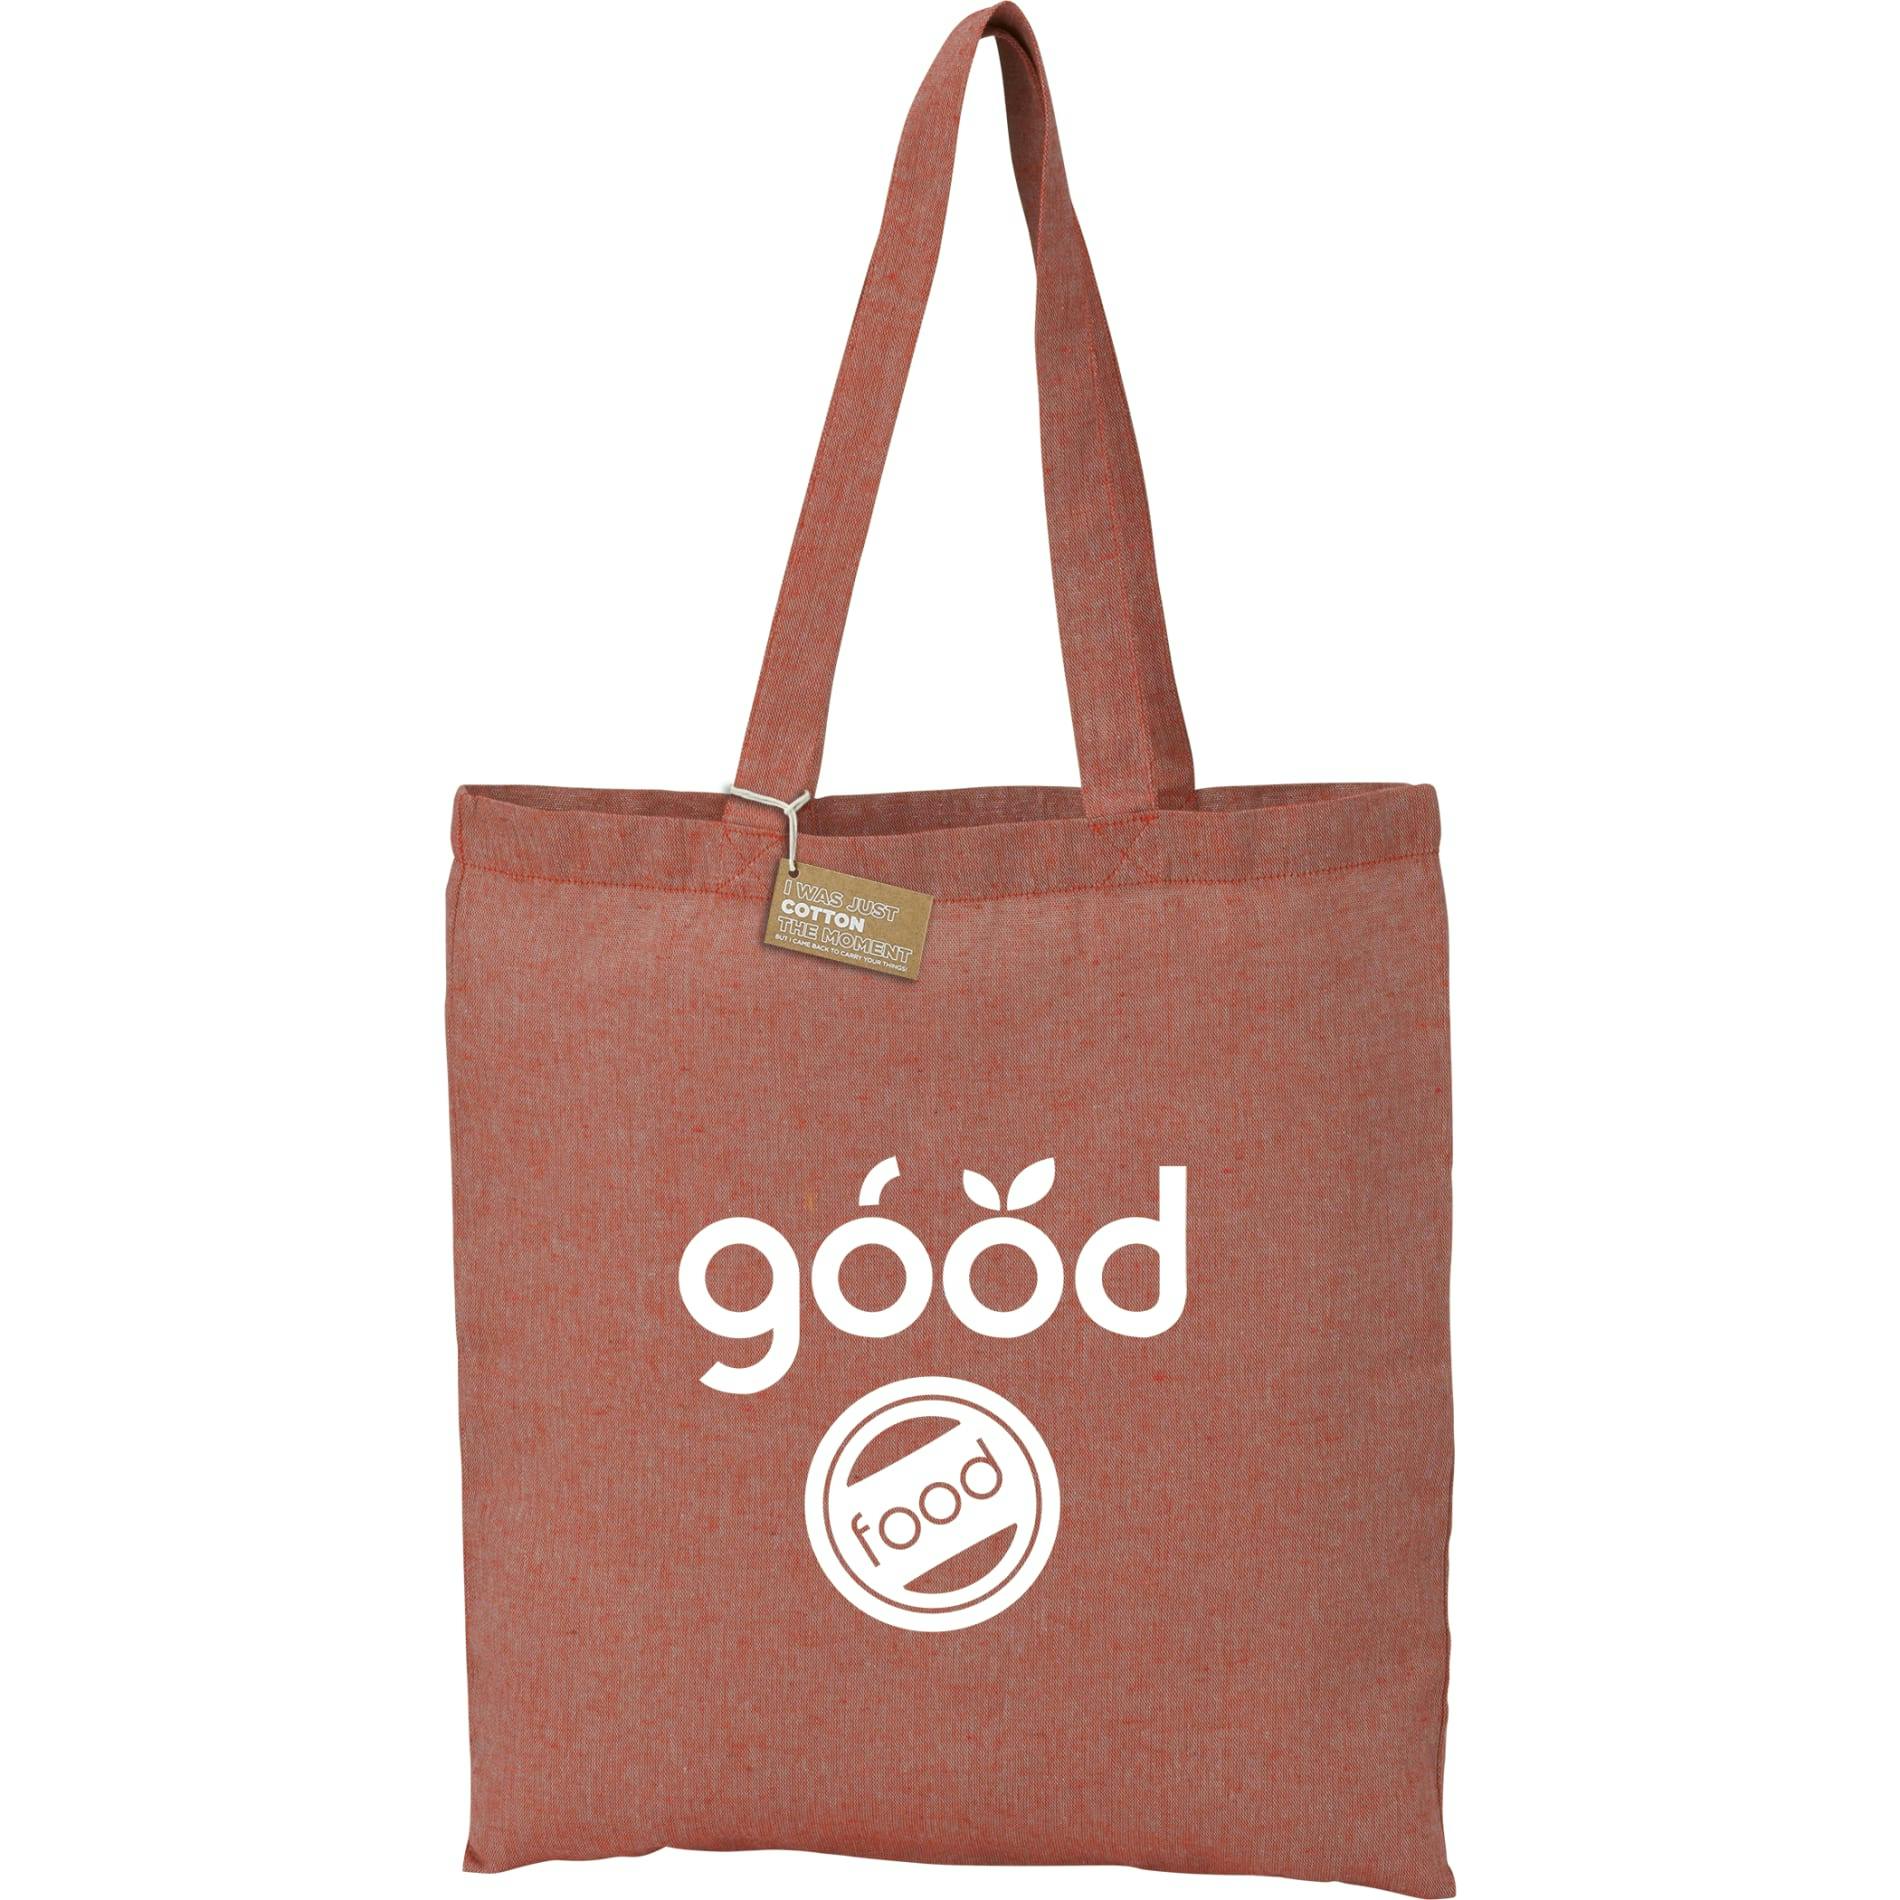 Recycled 5oz Cotton Twill Tote - additional Image 1